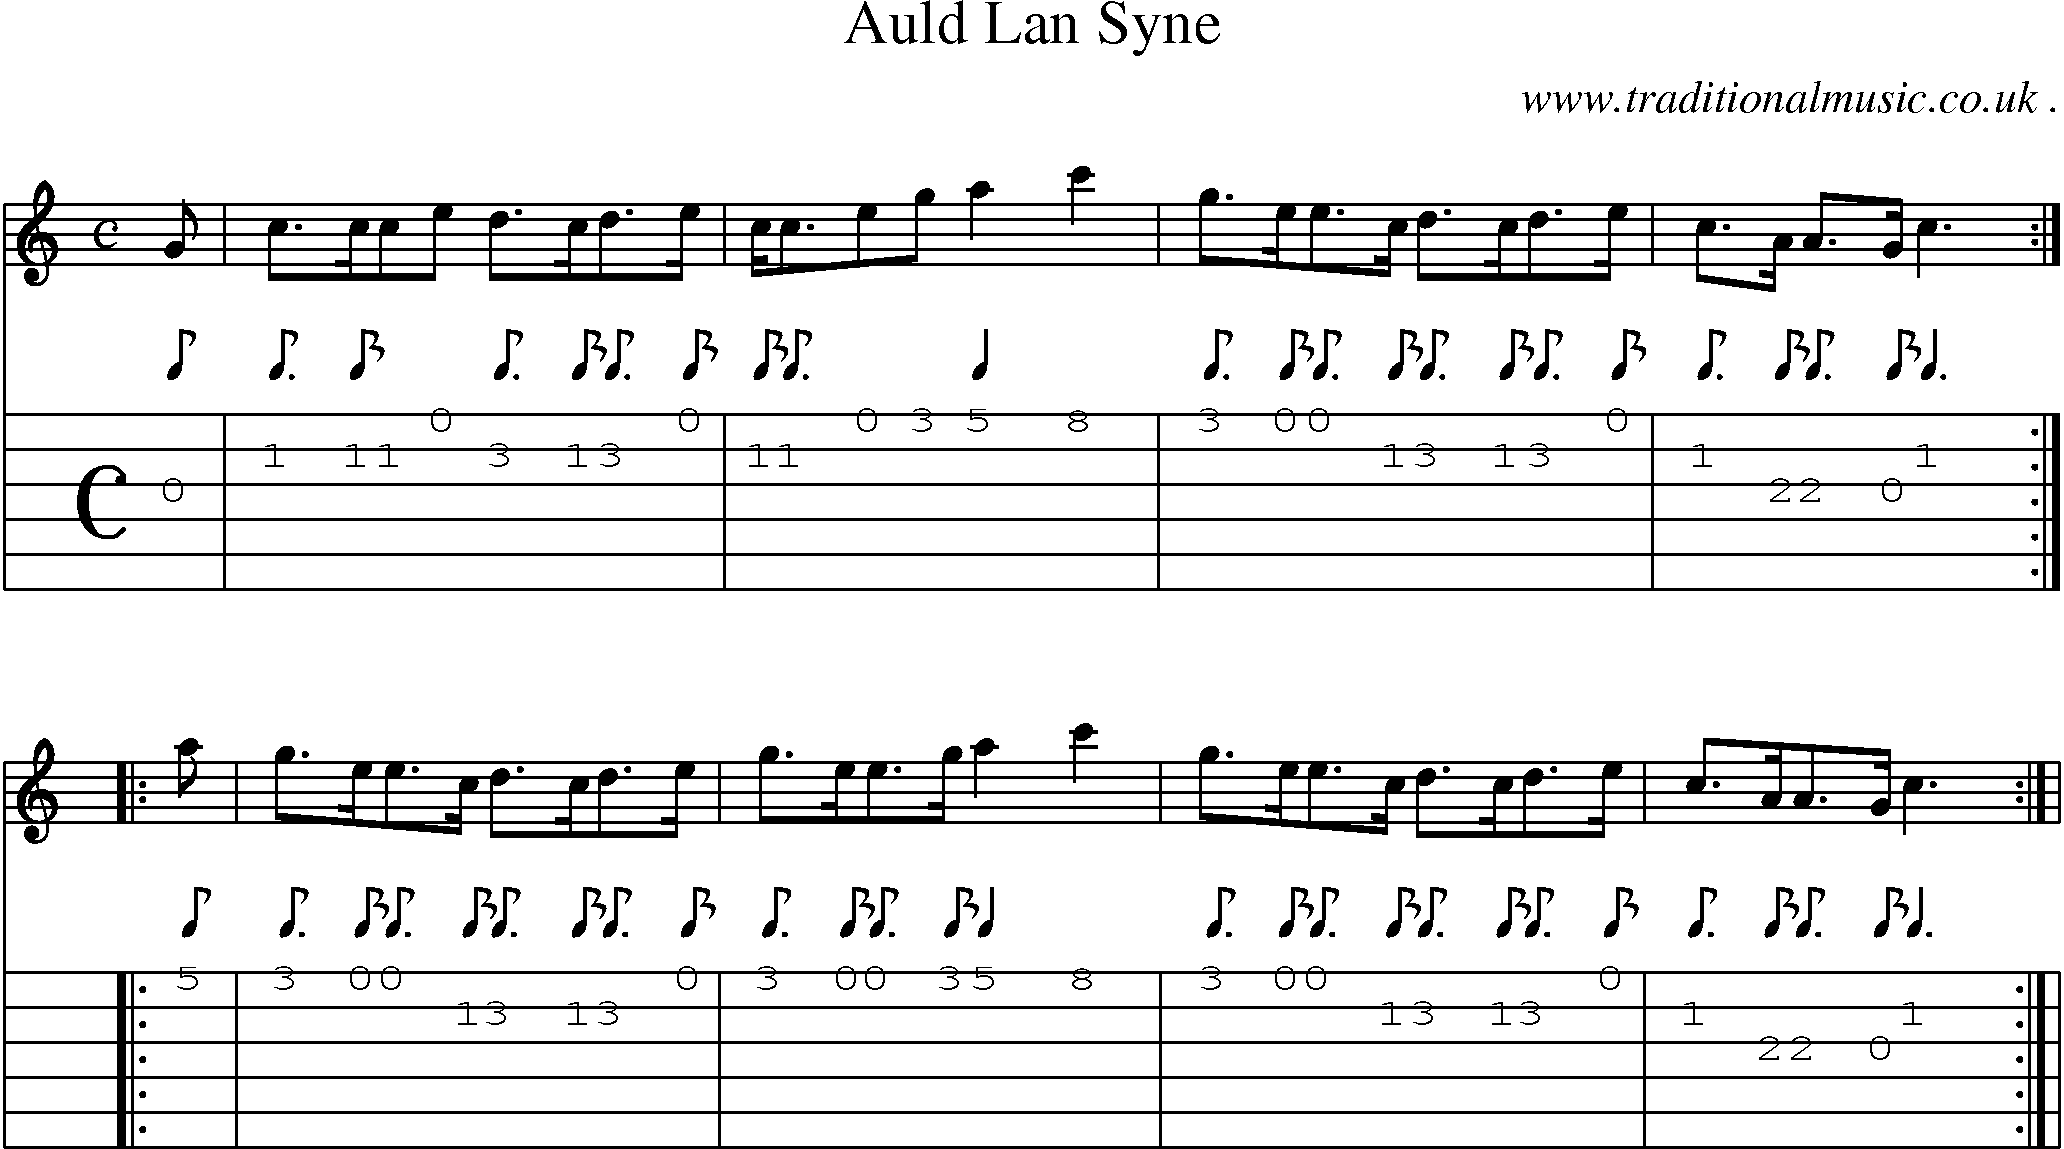 Sheet-Music and Guitar Tabs for Auld Lan Syne